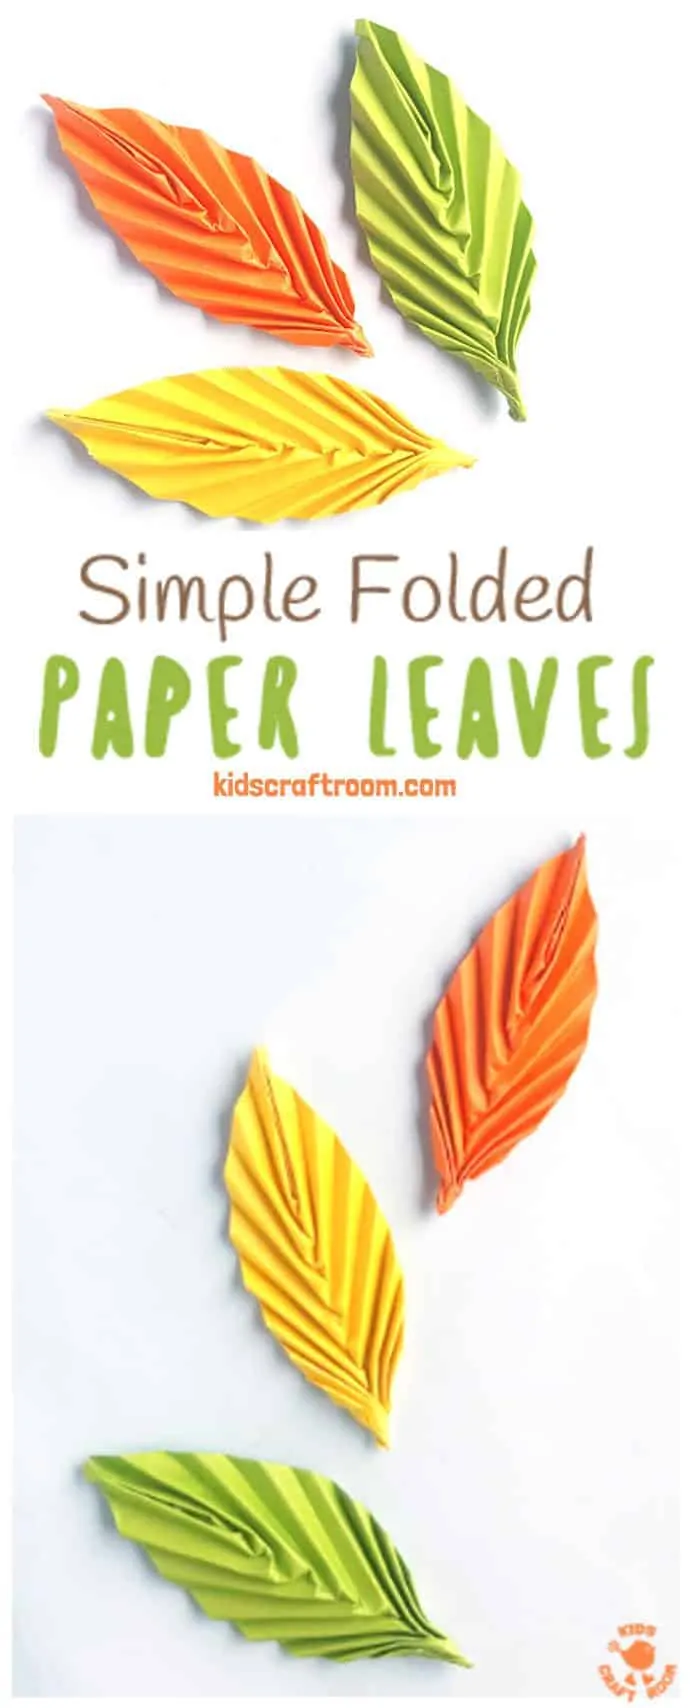 How To Make Folded Paper Leaves - Kids Craft Room